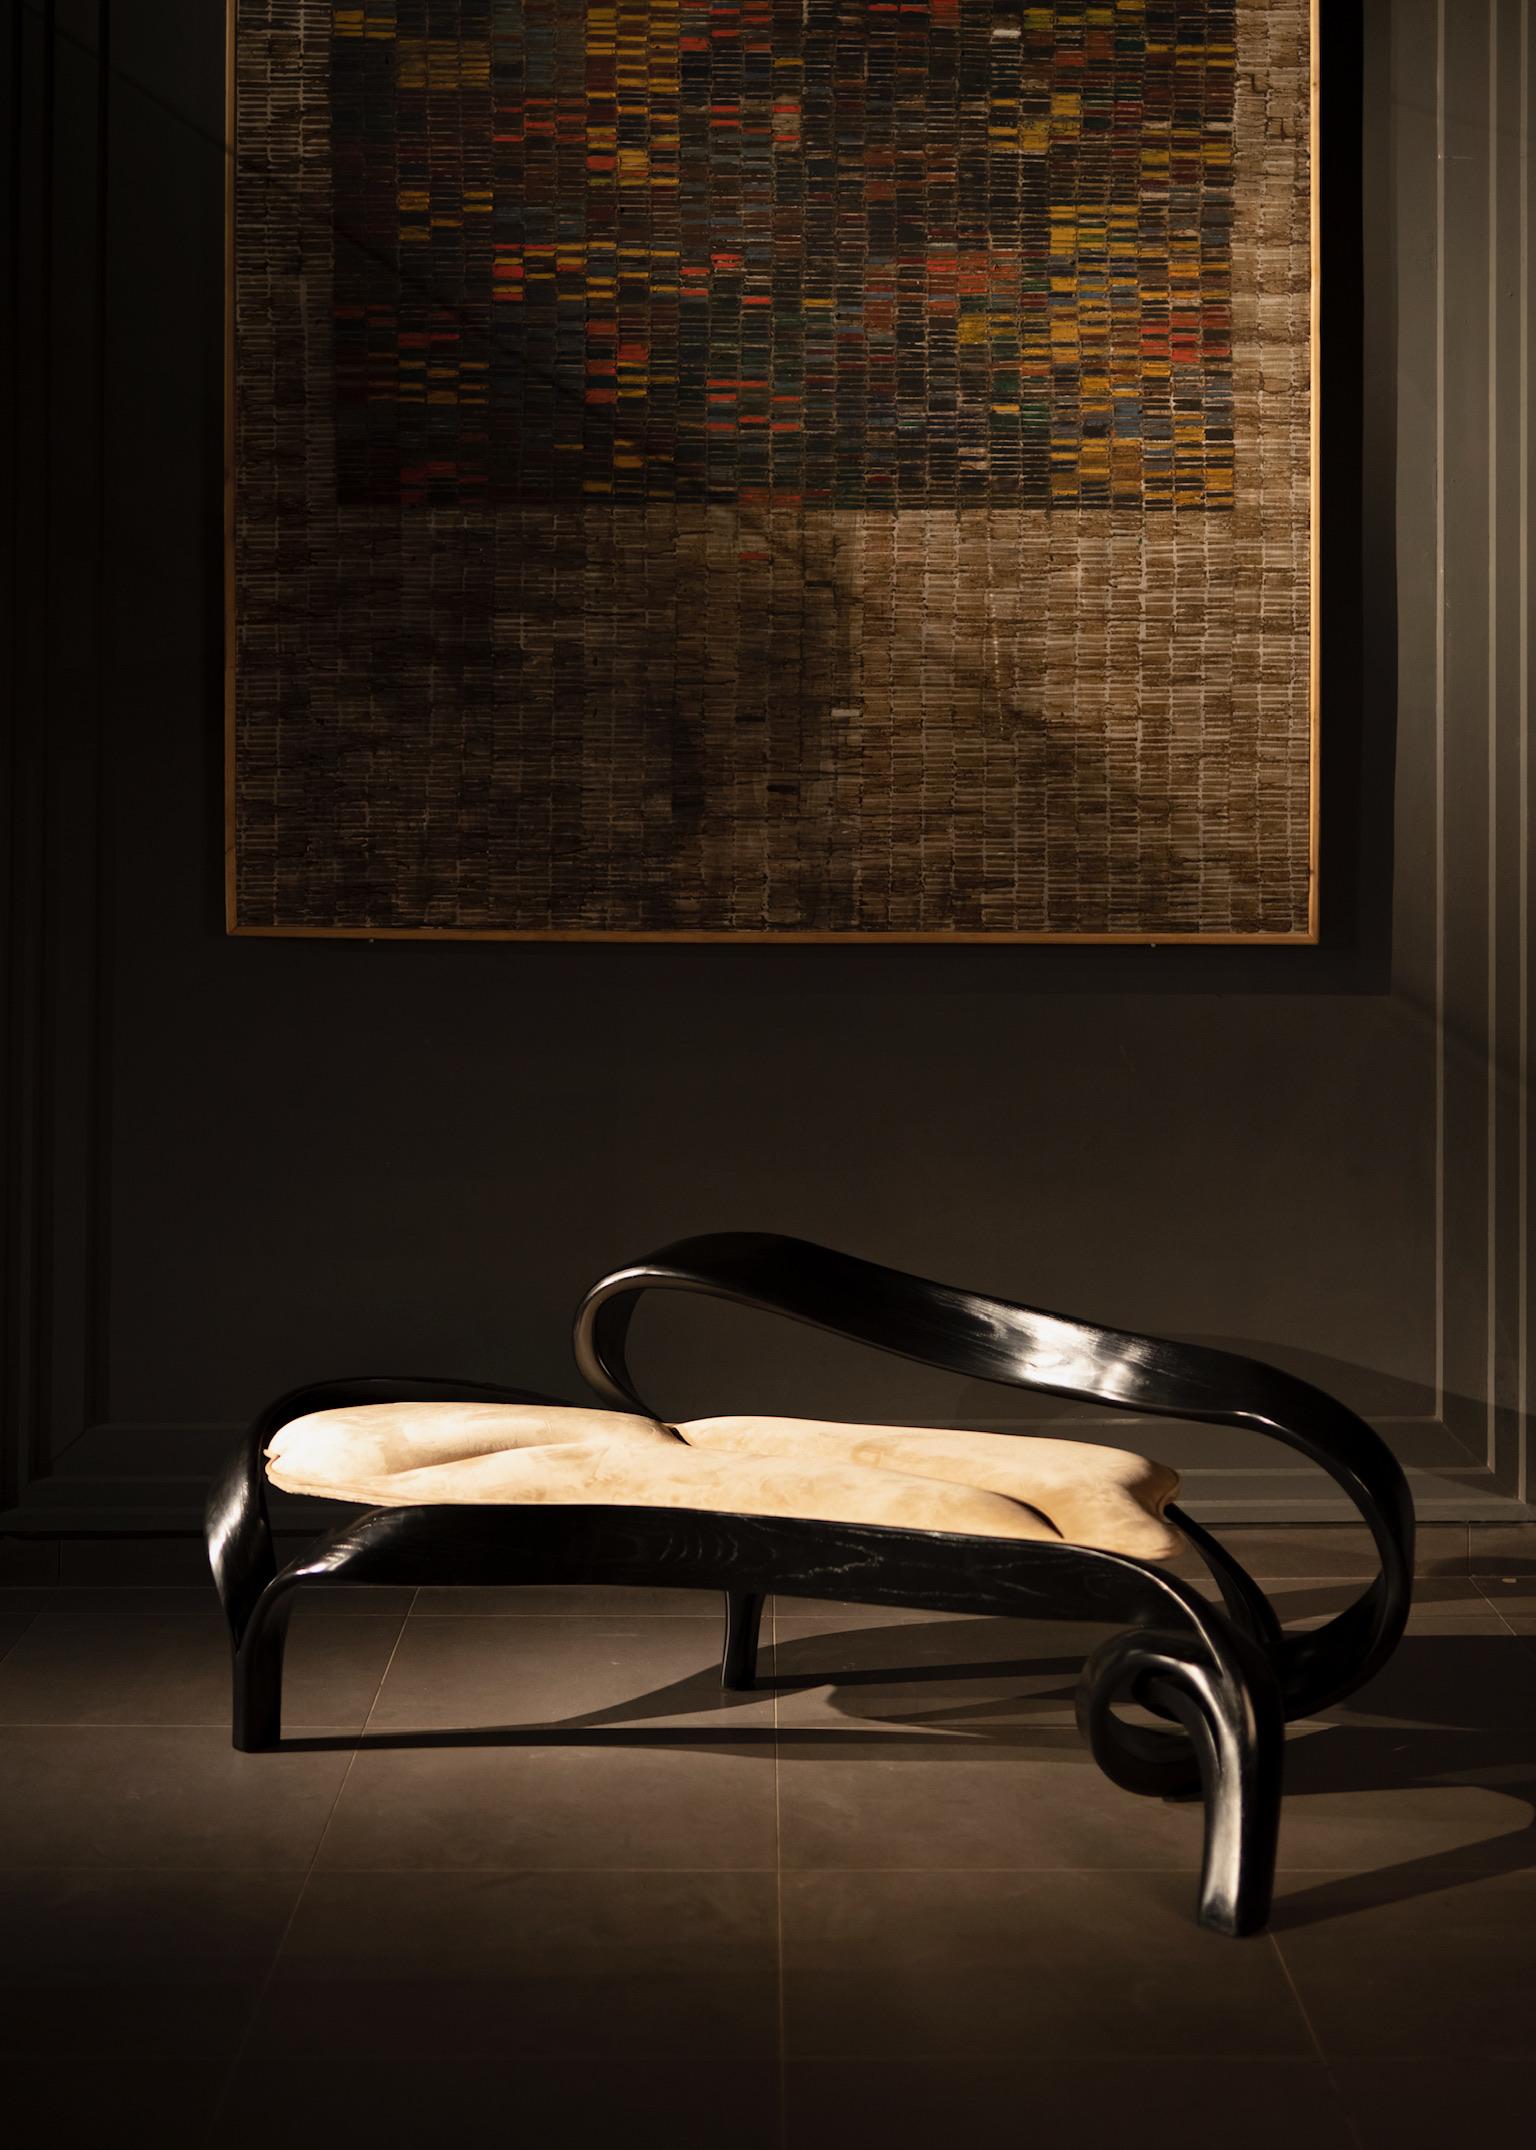 The Two Seater No. 2, a chassis designed by Raka Studio using an ancient Japanese technique of bending wood. The design is inspired by the organic flows of nature and the natural shapes that occur in a natural landscape. Each design element